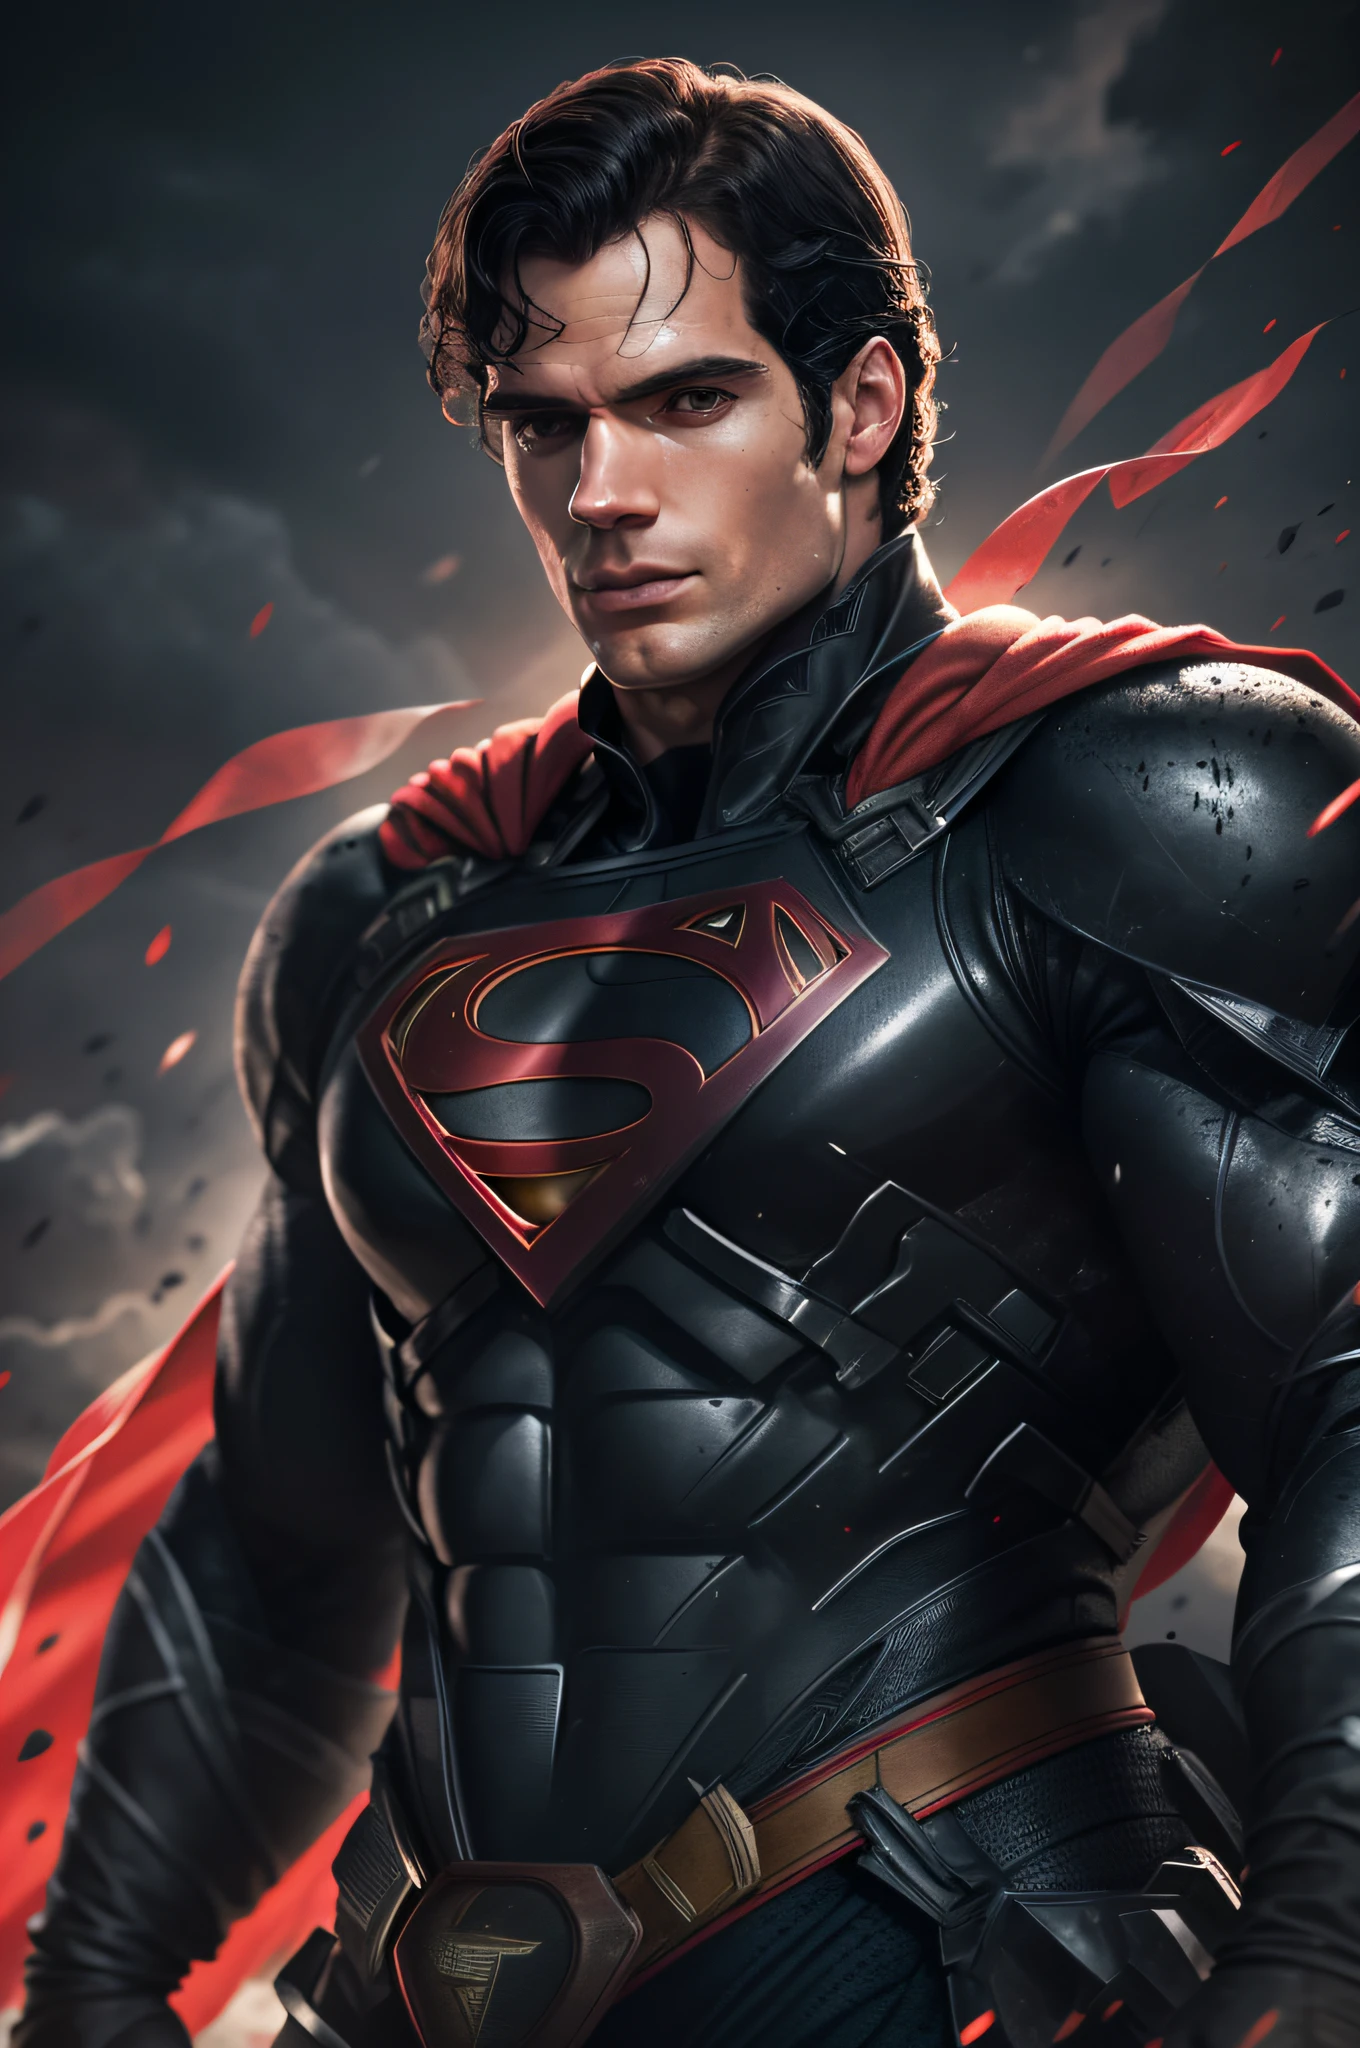 Henry Cavill as Superman, 40s year old, all black and red details suit, red cape, strain of hair covering forehead, short cut hair, tidy hair, tall, manly, hunk body, muscular, straight face, black medium hair, best quality, high resolution:1.2, masterpiece, raw photo, dark background, detailed suit, detailed face, upper body shot